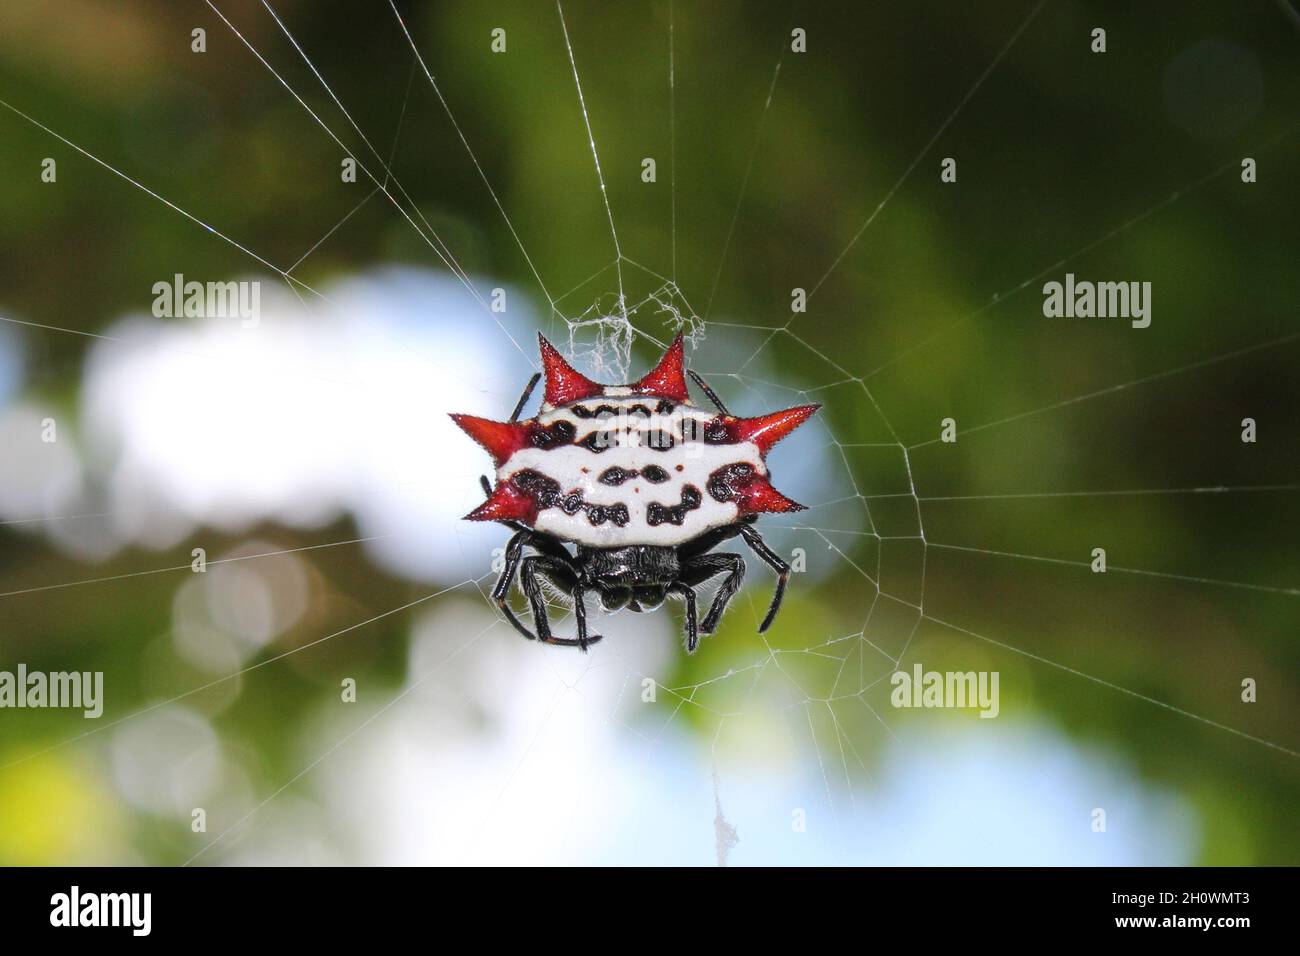 Crab-like Spiny backed Orb Weaver Spider - Gasteracantha cancriformis: Found in many parts of the Tropics in both Northern and Southern hemispheres. Stock Photo